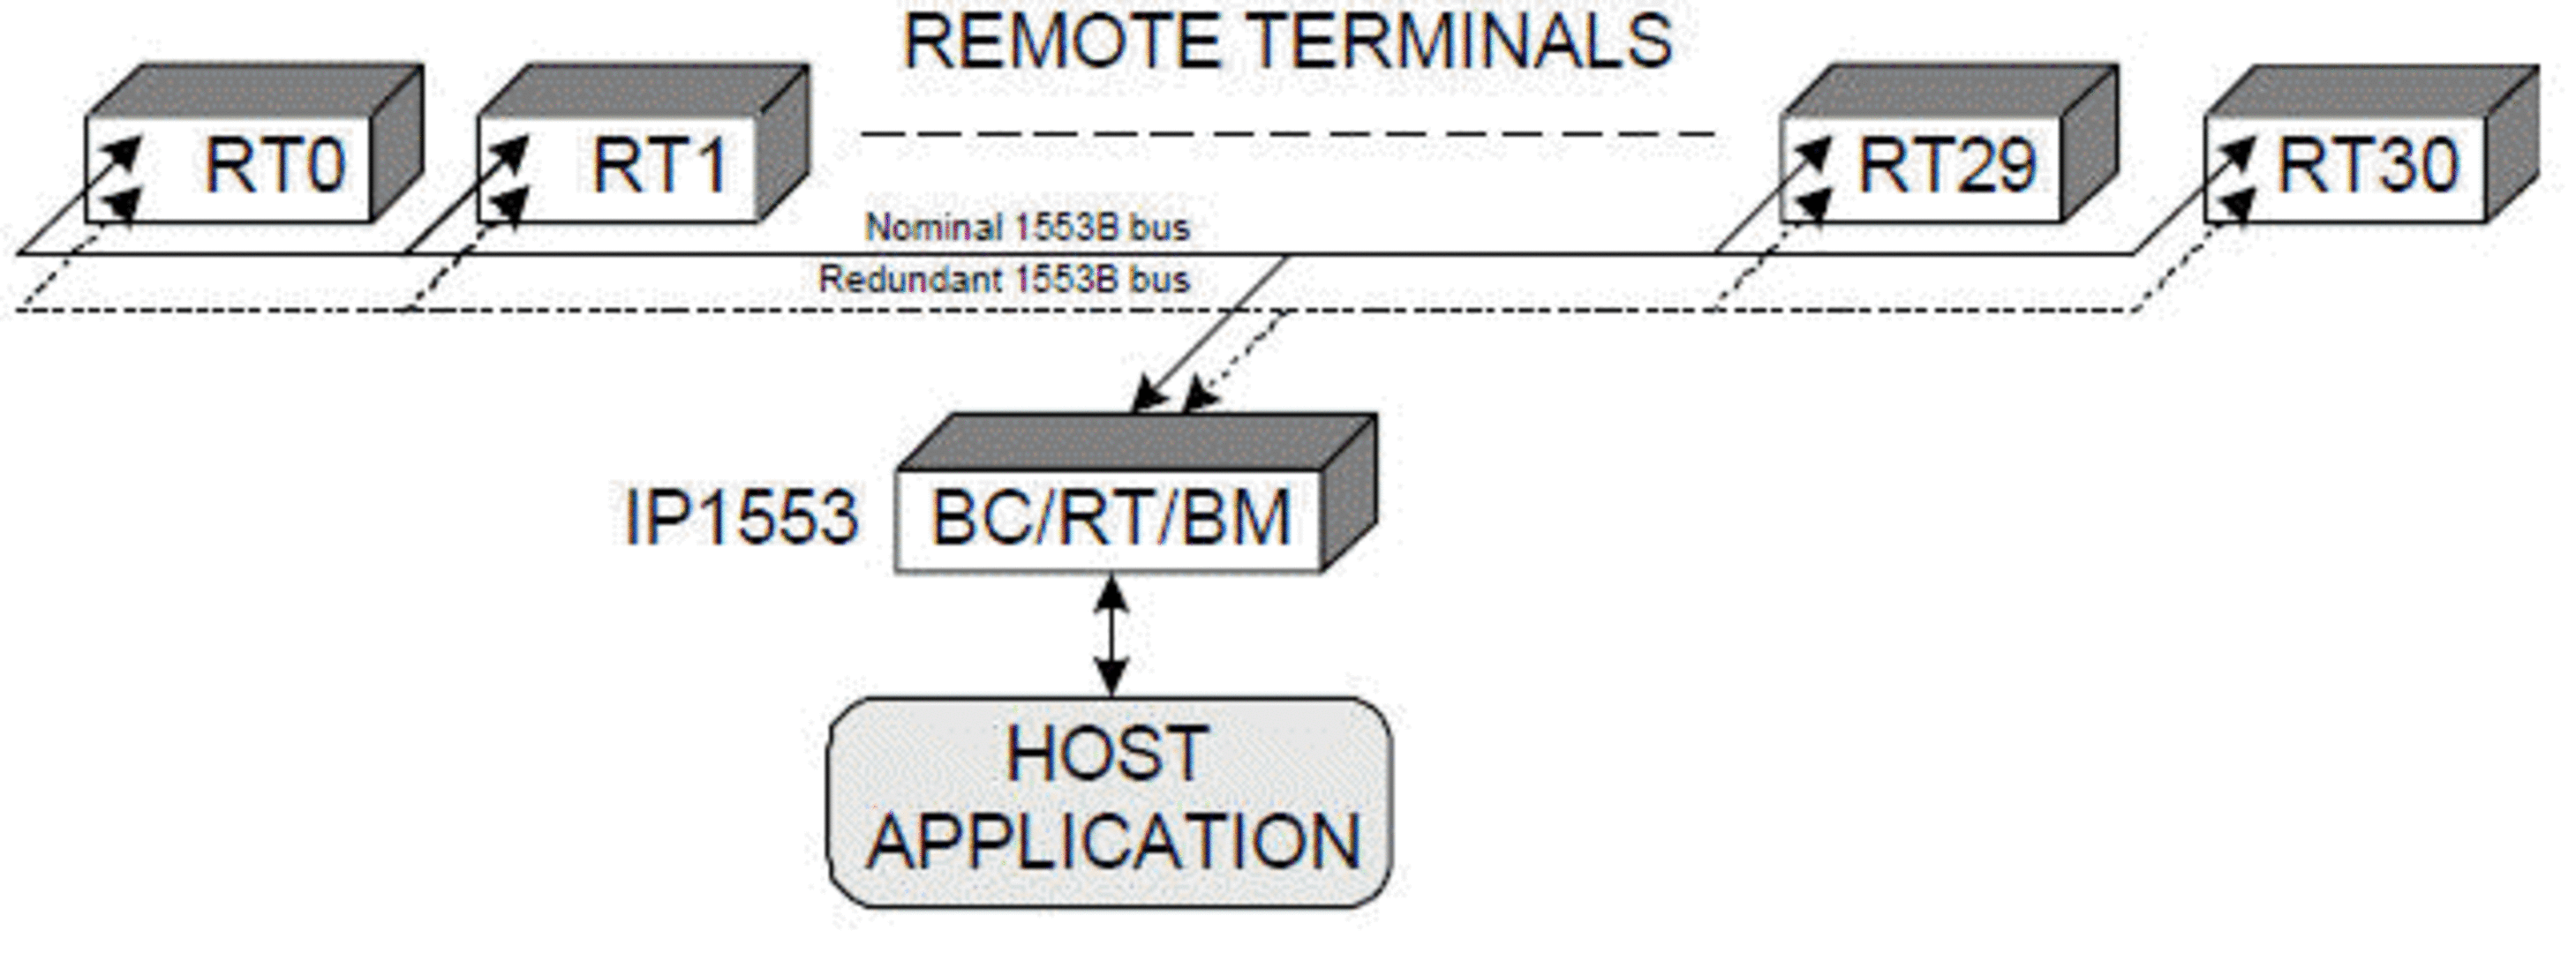 Coupling between the Application and the 1553B busses, using the IP1553 IP Core